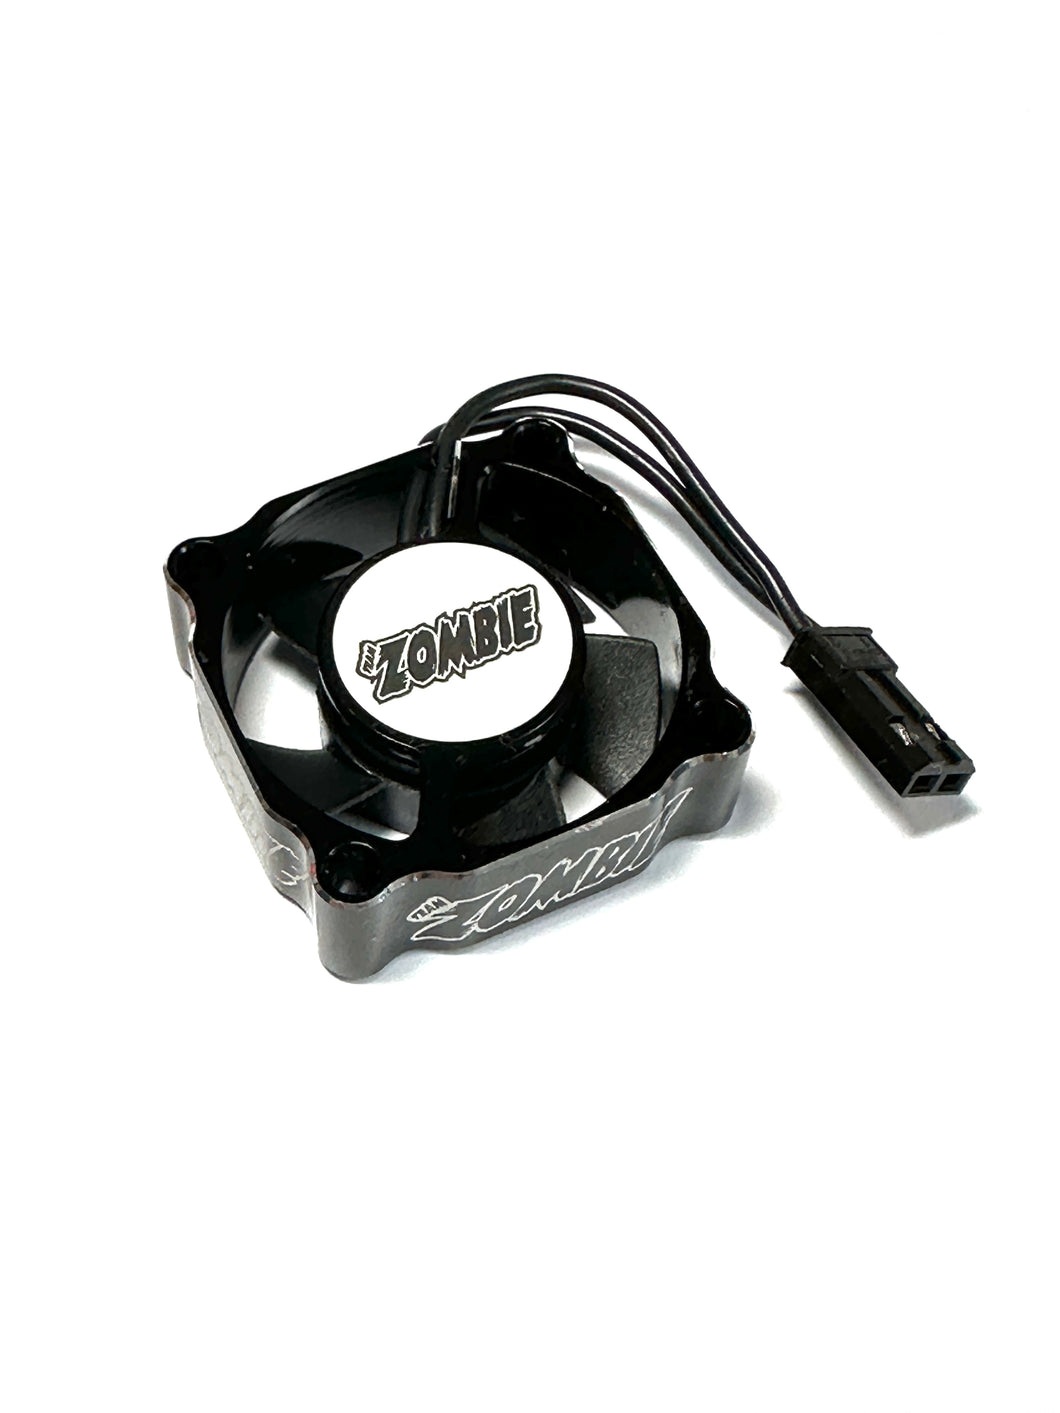 Team Zombie Alloy hyper 15g+ thrust 30mm cooling fan with JST+JR extension